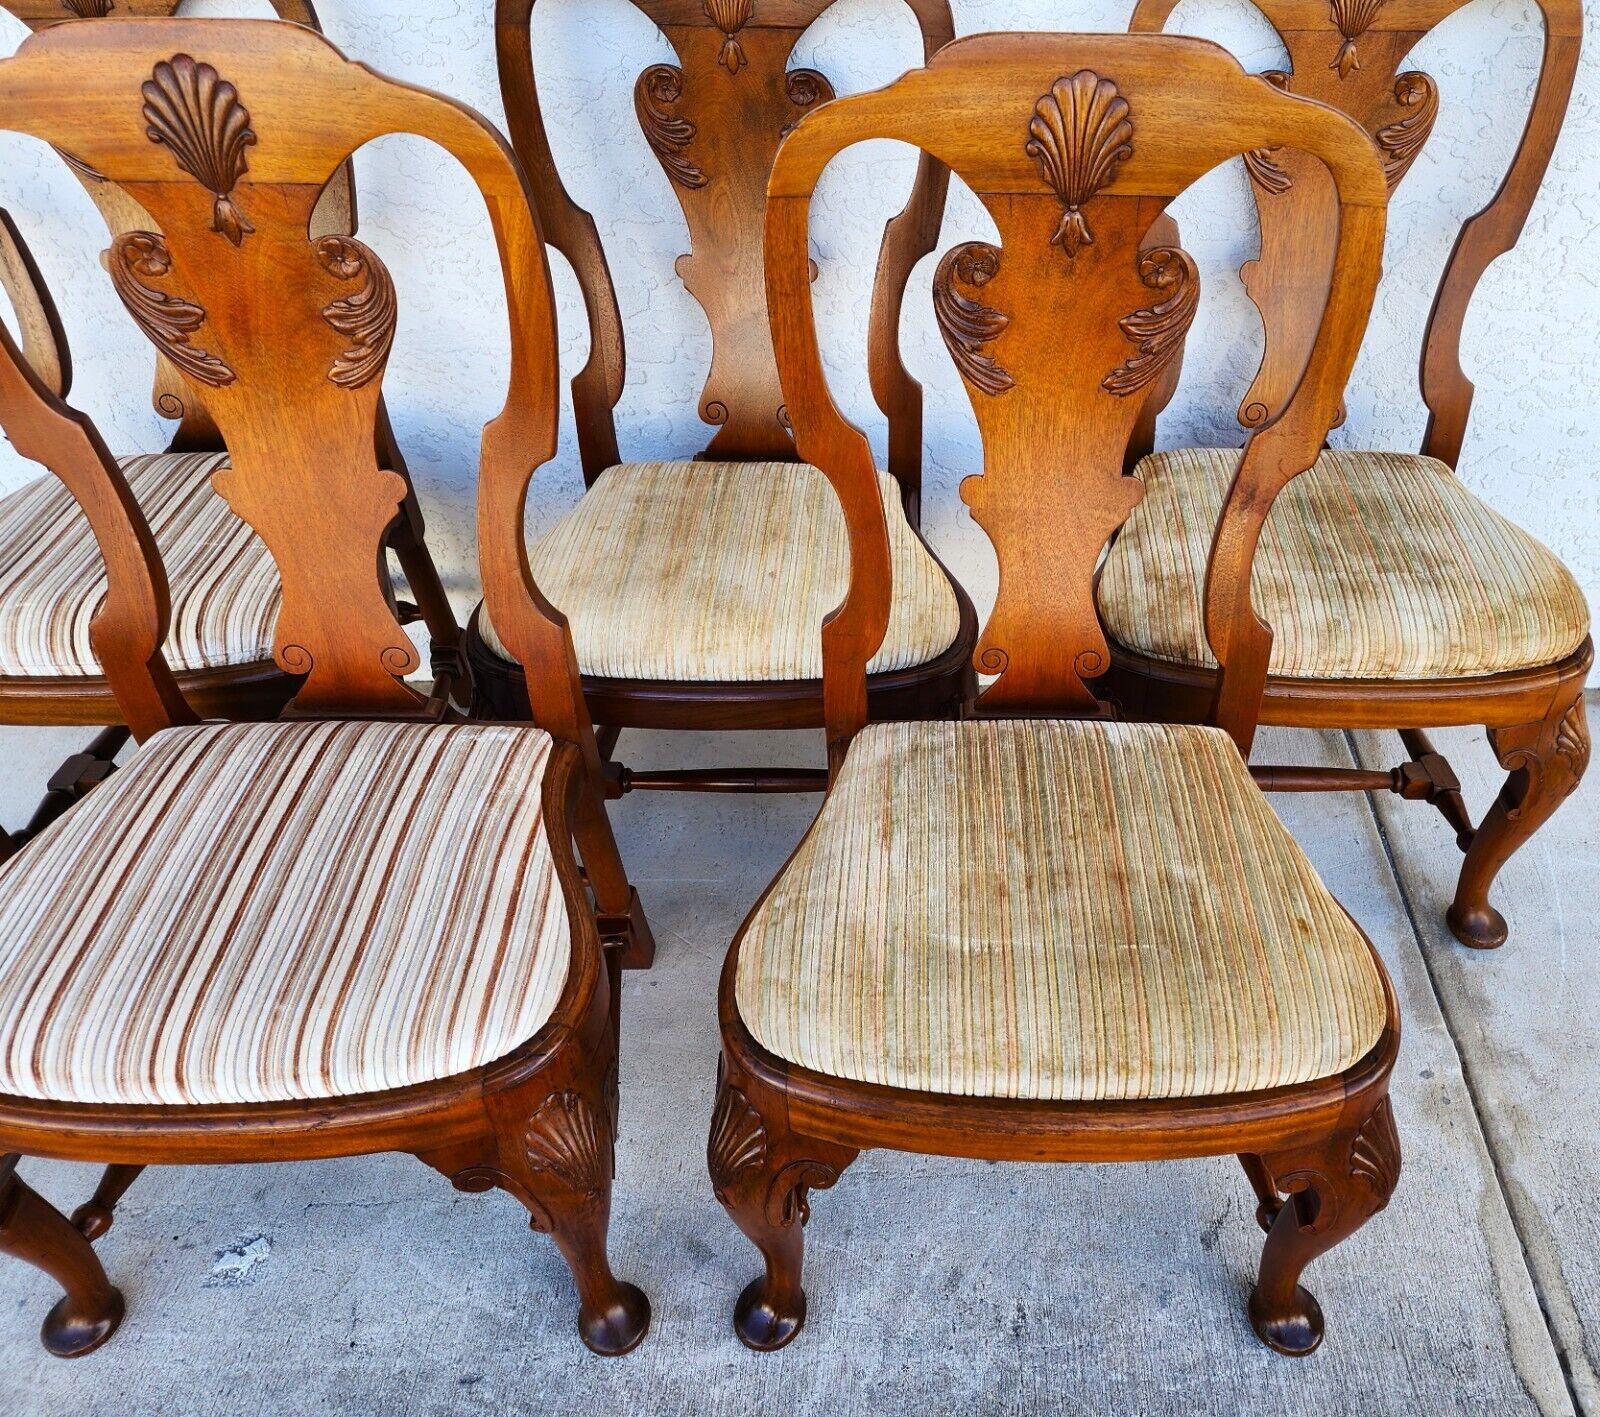 Antique Italian Georgian Dining Chairs Shell Walnut Set of 5 In Good Condition For Sale In Lake Worth, FL